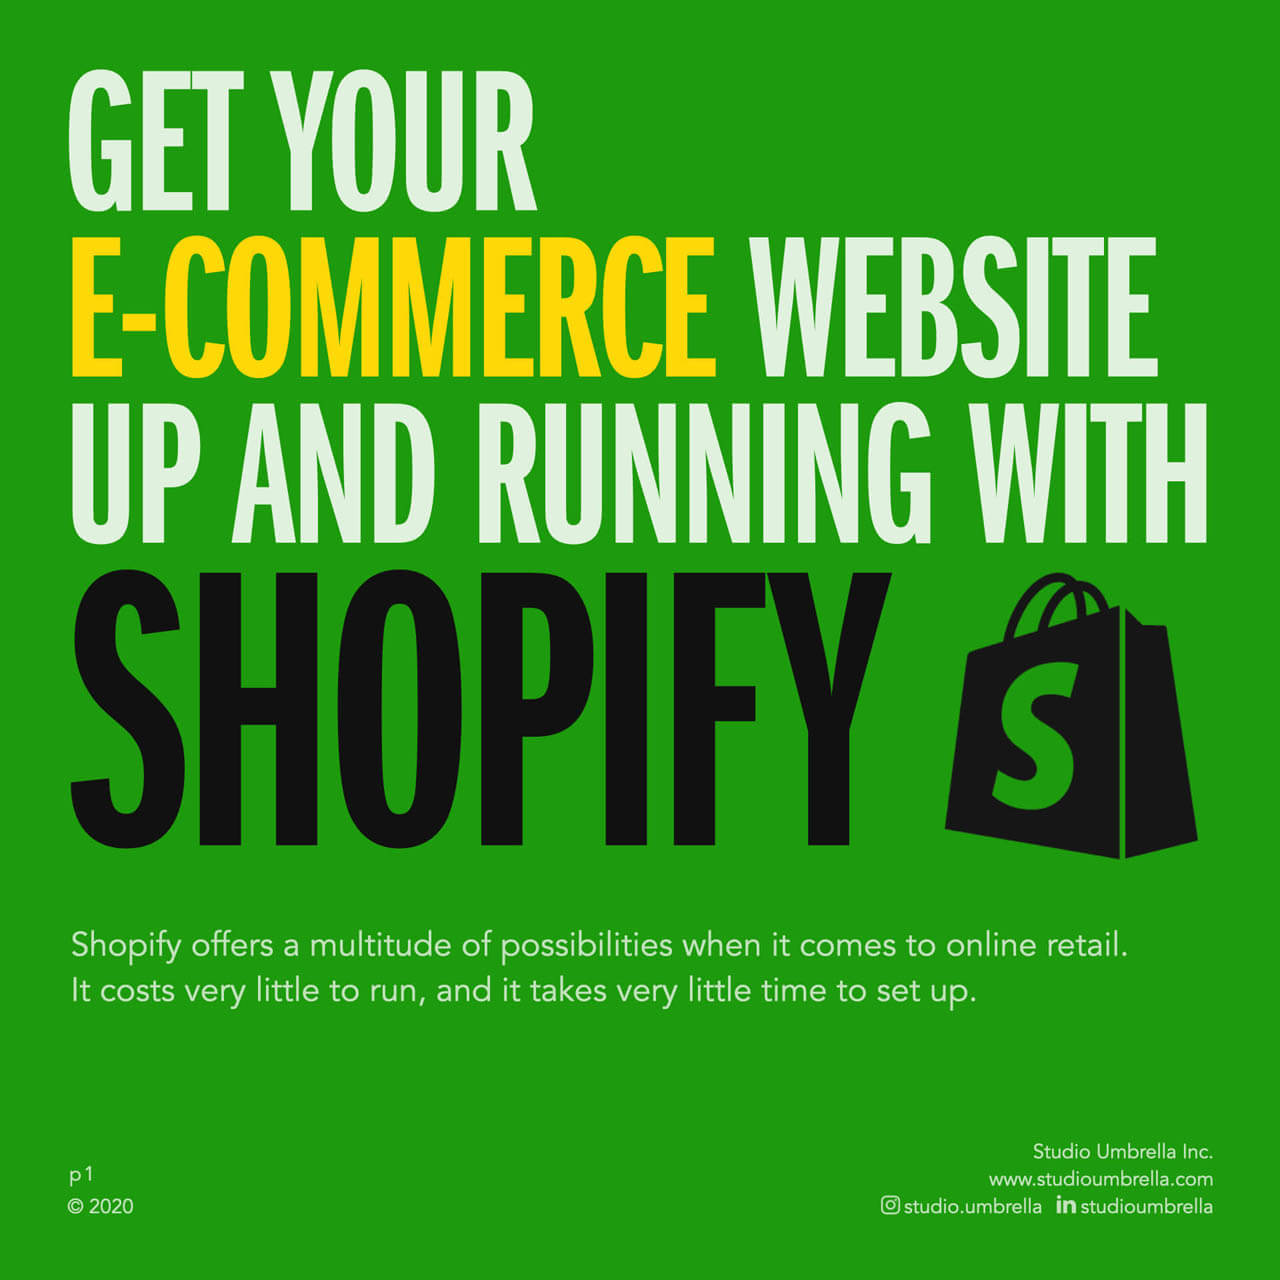 Get your E-Commerce website up and running with Shopify